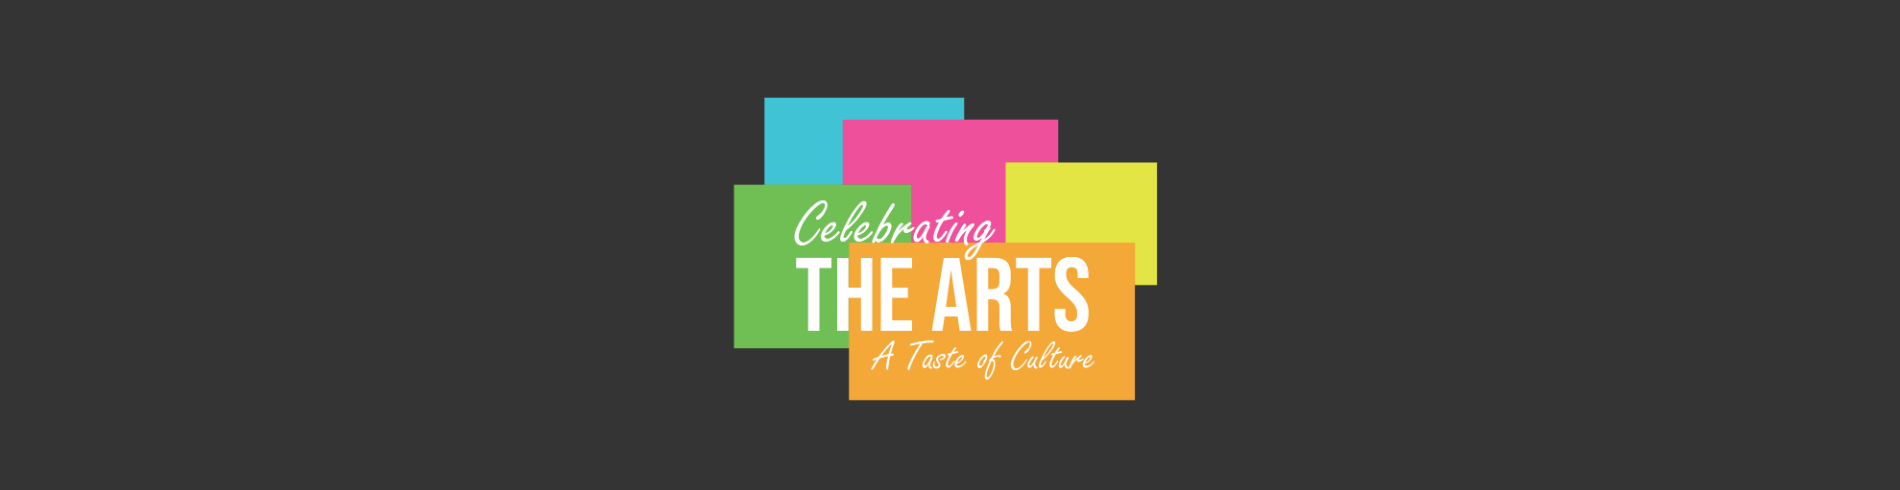 Celebrating the Arts: A Taste of Culture icon